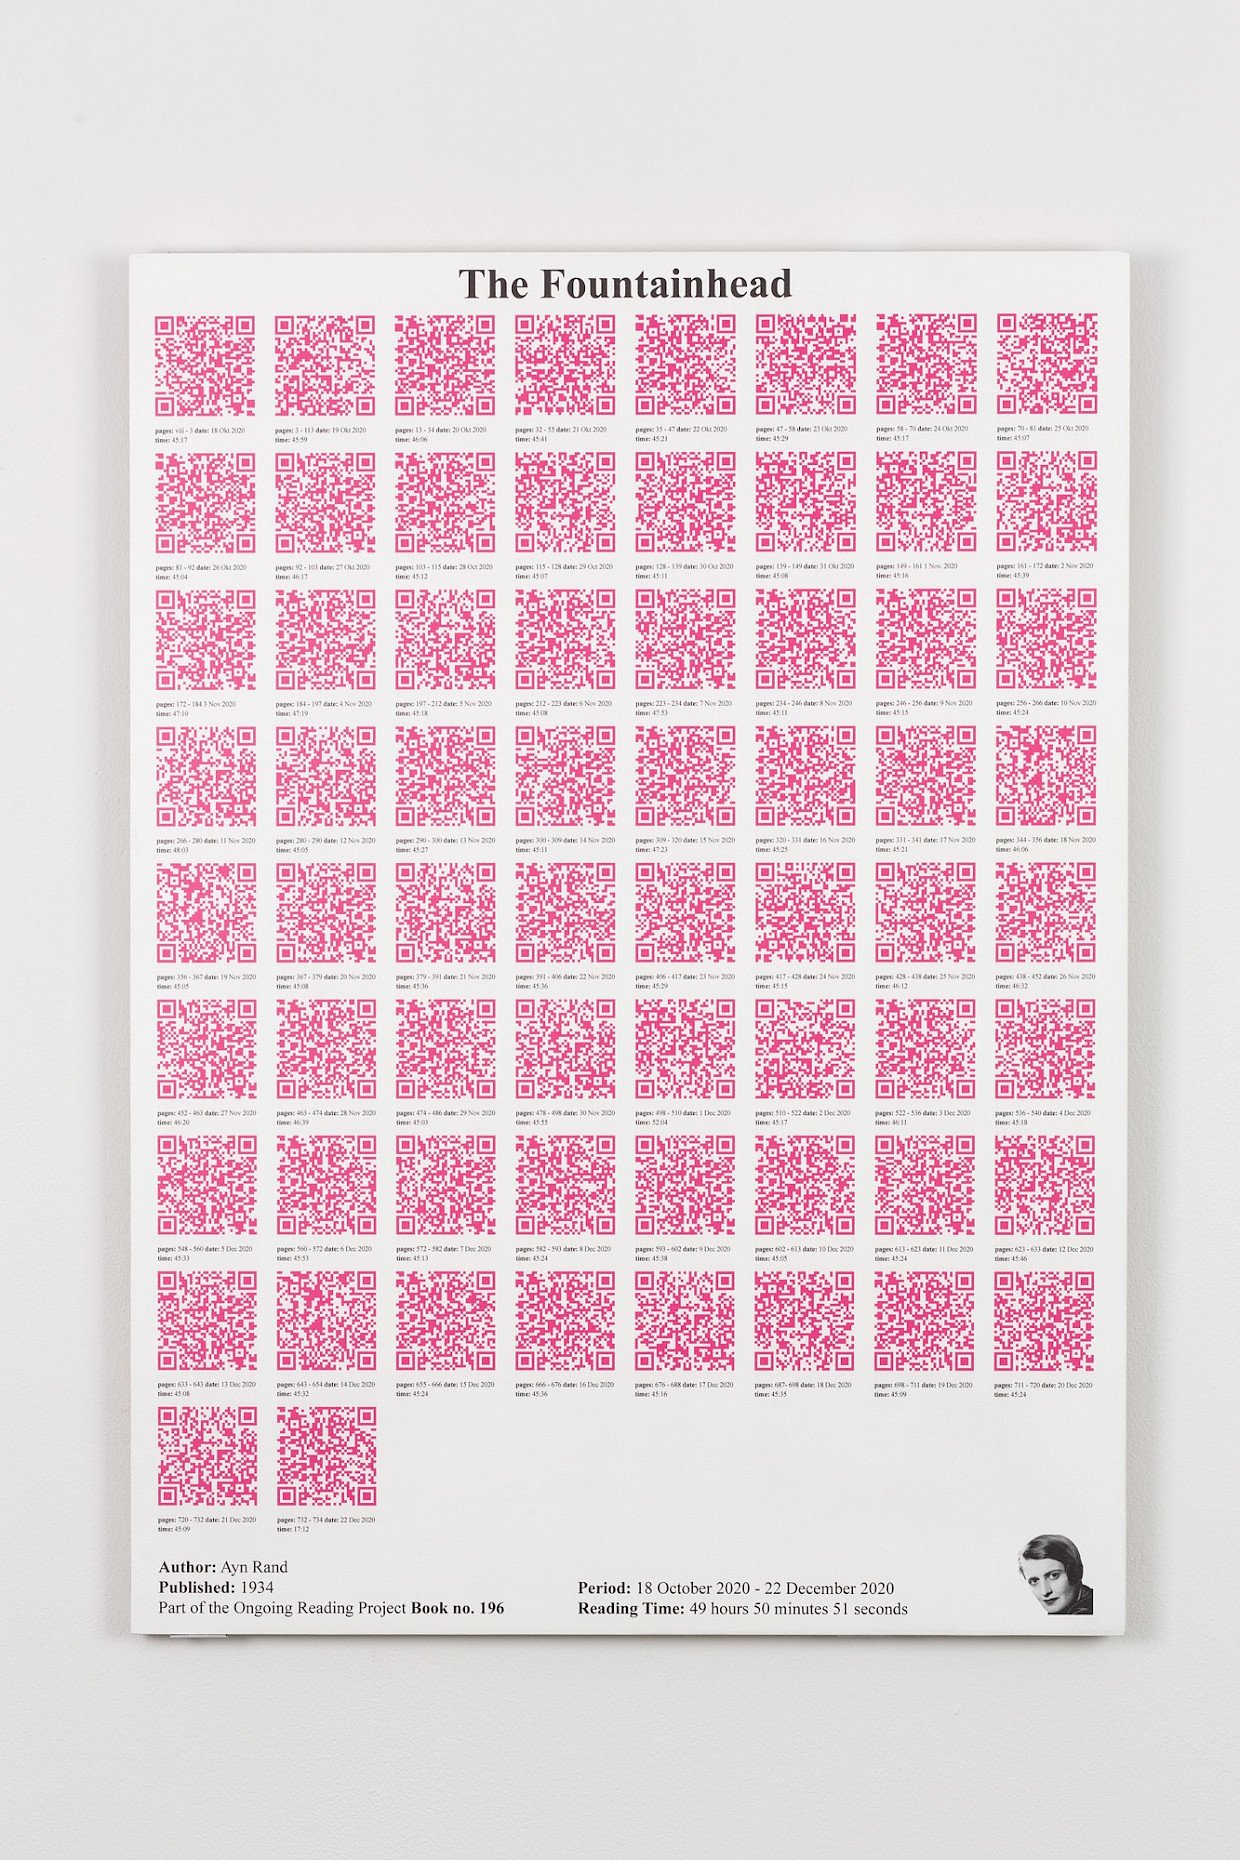 Image from QR-code panel, Book no. 196 by Allen & Overy